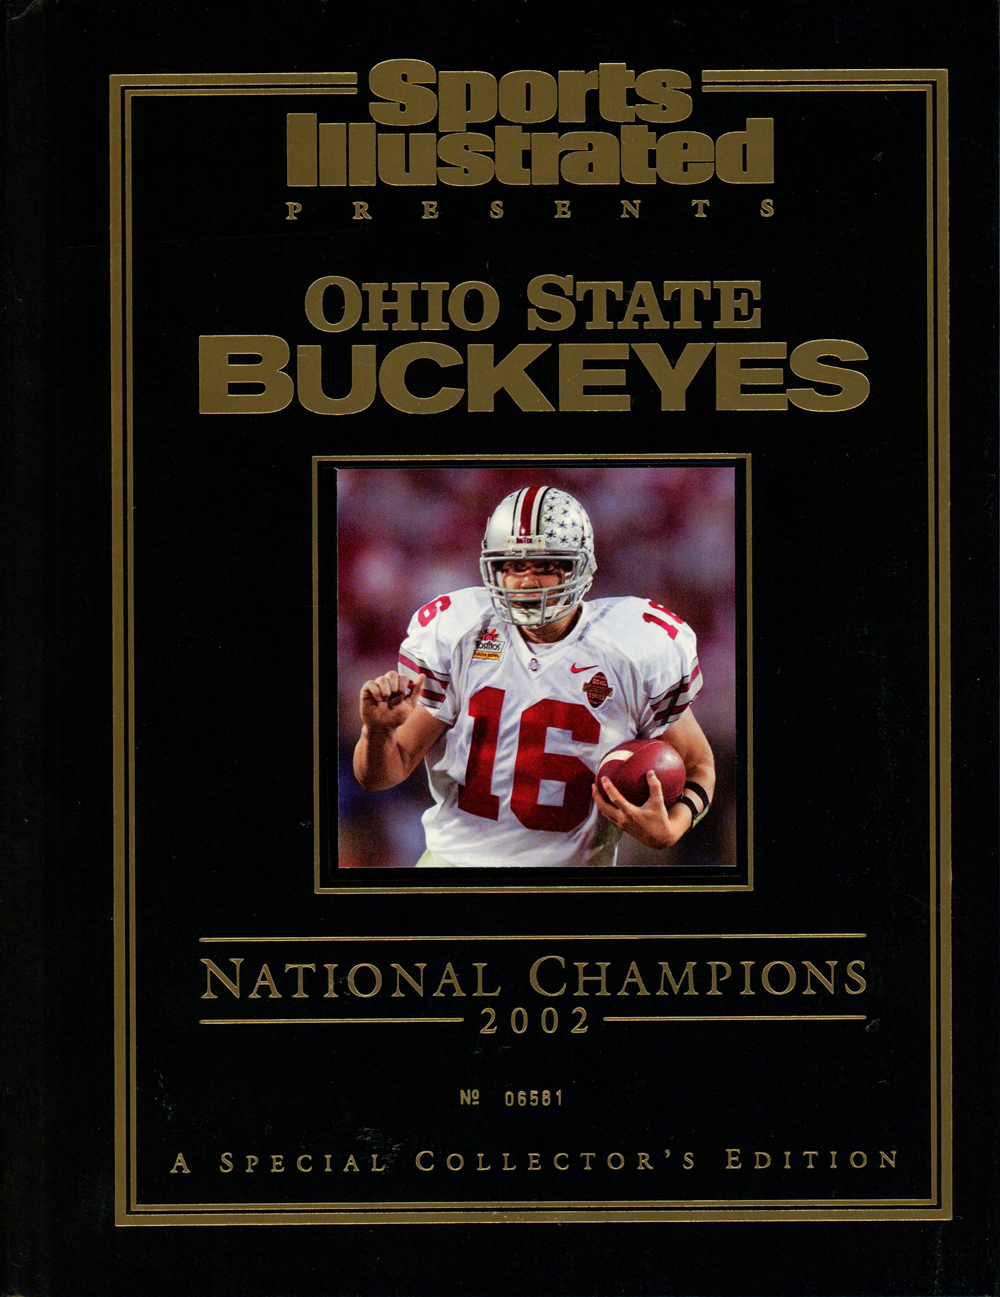 Sports Illustrated Ohio State Buckeyes 2002 National Champions Book